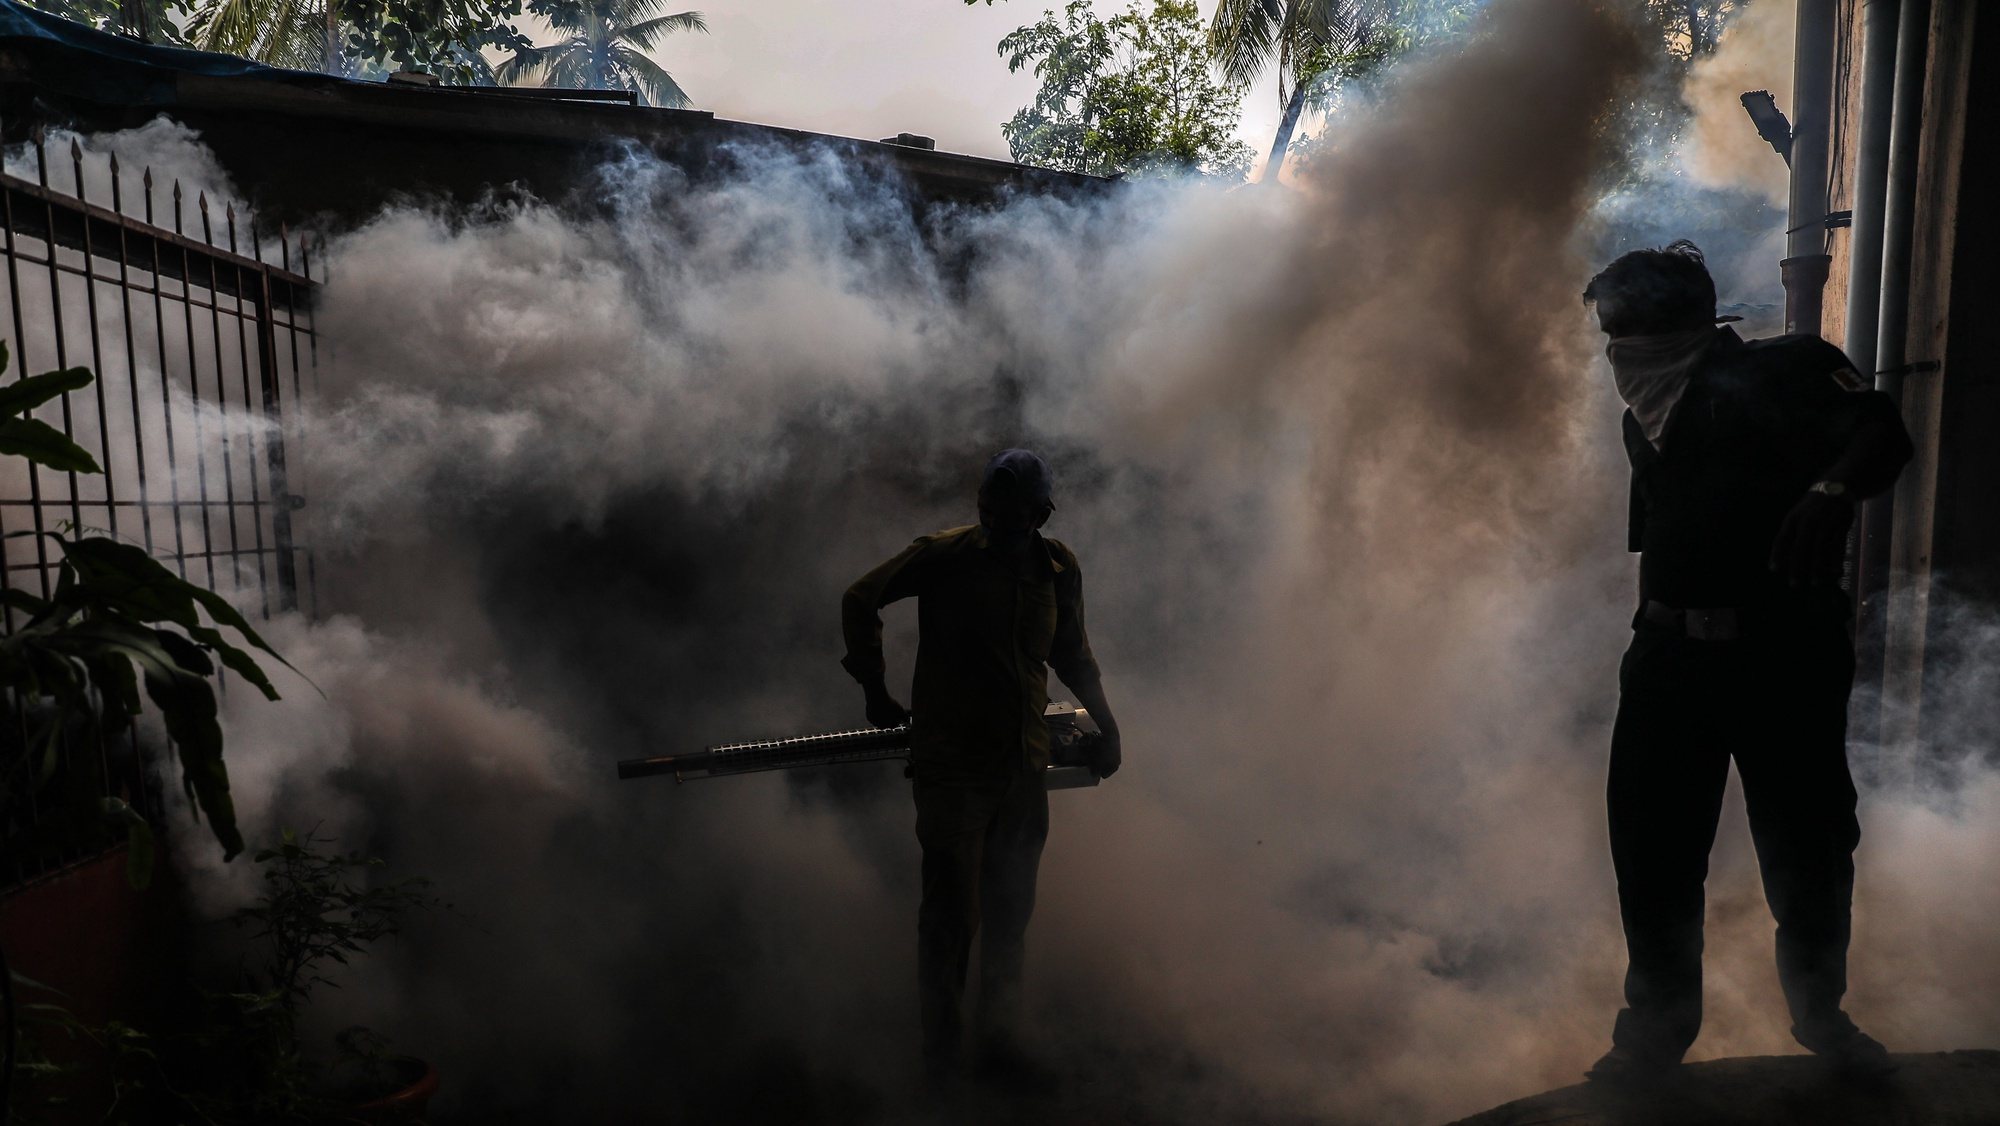 epa08570594 A municipal worker wearing a face mask uses an anti-malaria fumigation spray machine at a residential area in Mumbai, India, 28 July, 2020. The measure is regularly taken by the municipal corporation to try to avoid any kind of diseases caused by mosquitoes. The workers, reportedly, fumigate in all areas of the city, from slum to high rise residential buildings, from shops to sewage canals, ponds and puddles in the streets.  EPA/DIVYAKANT SOLANKI